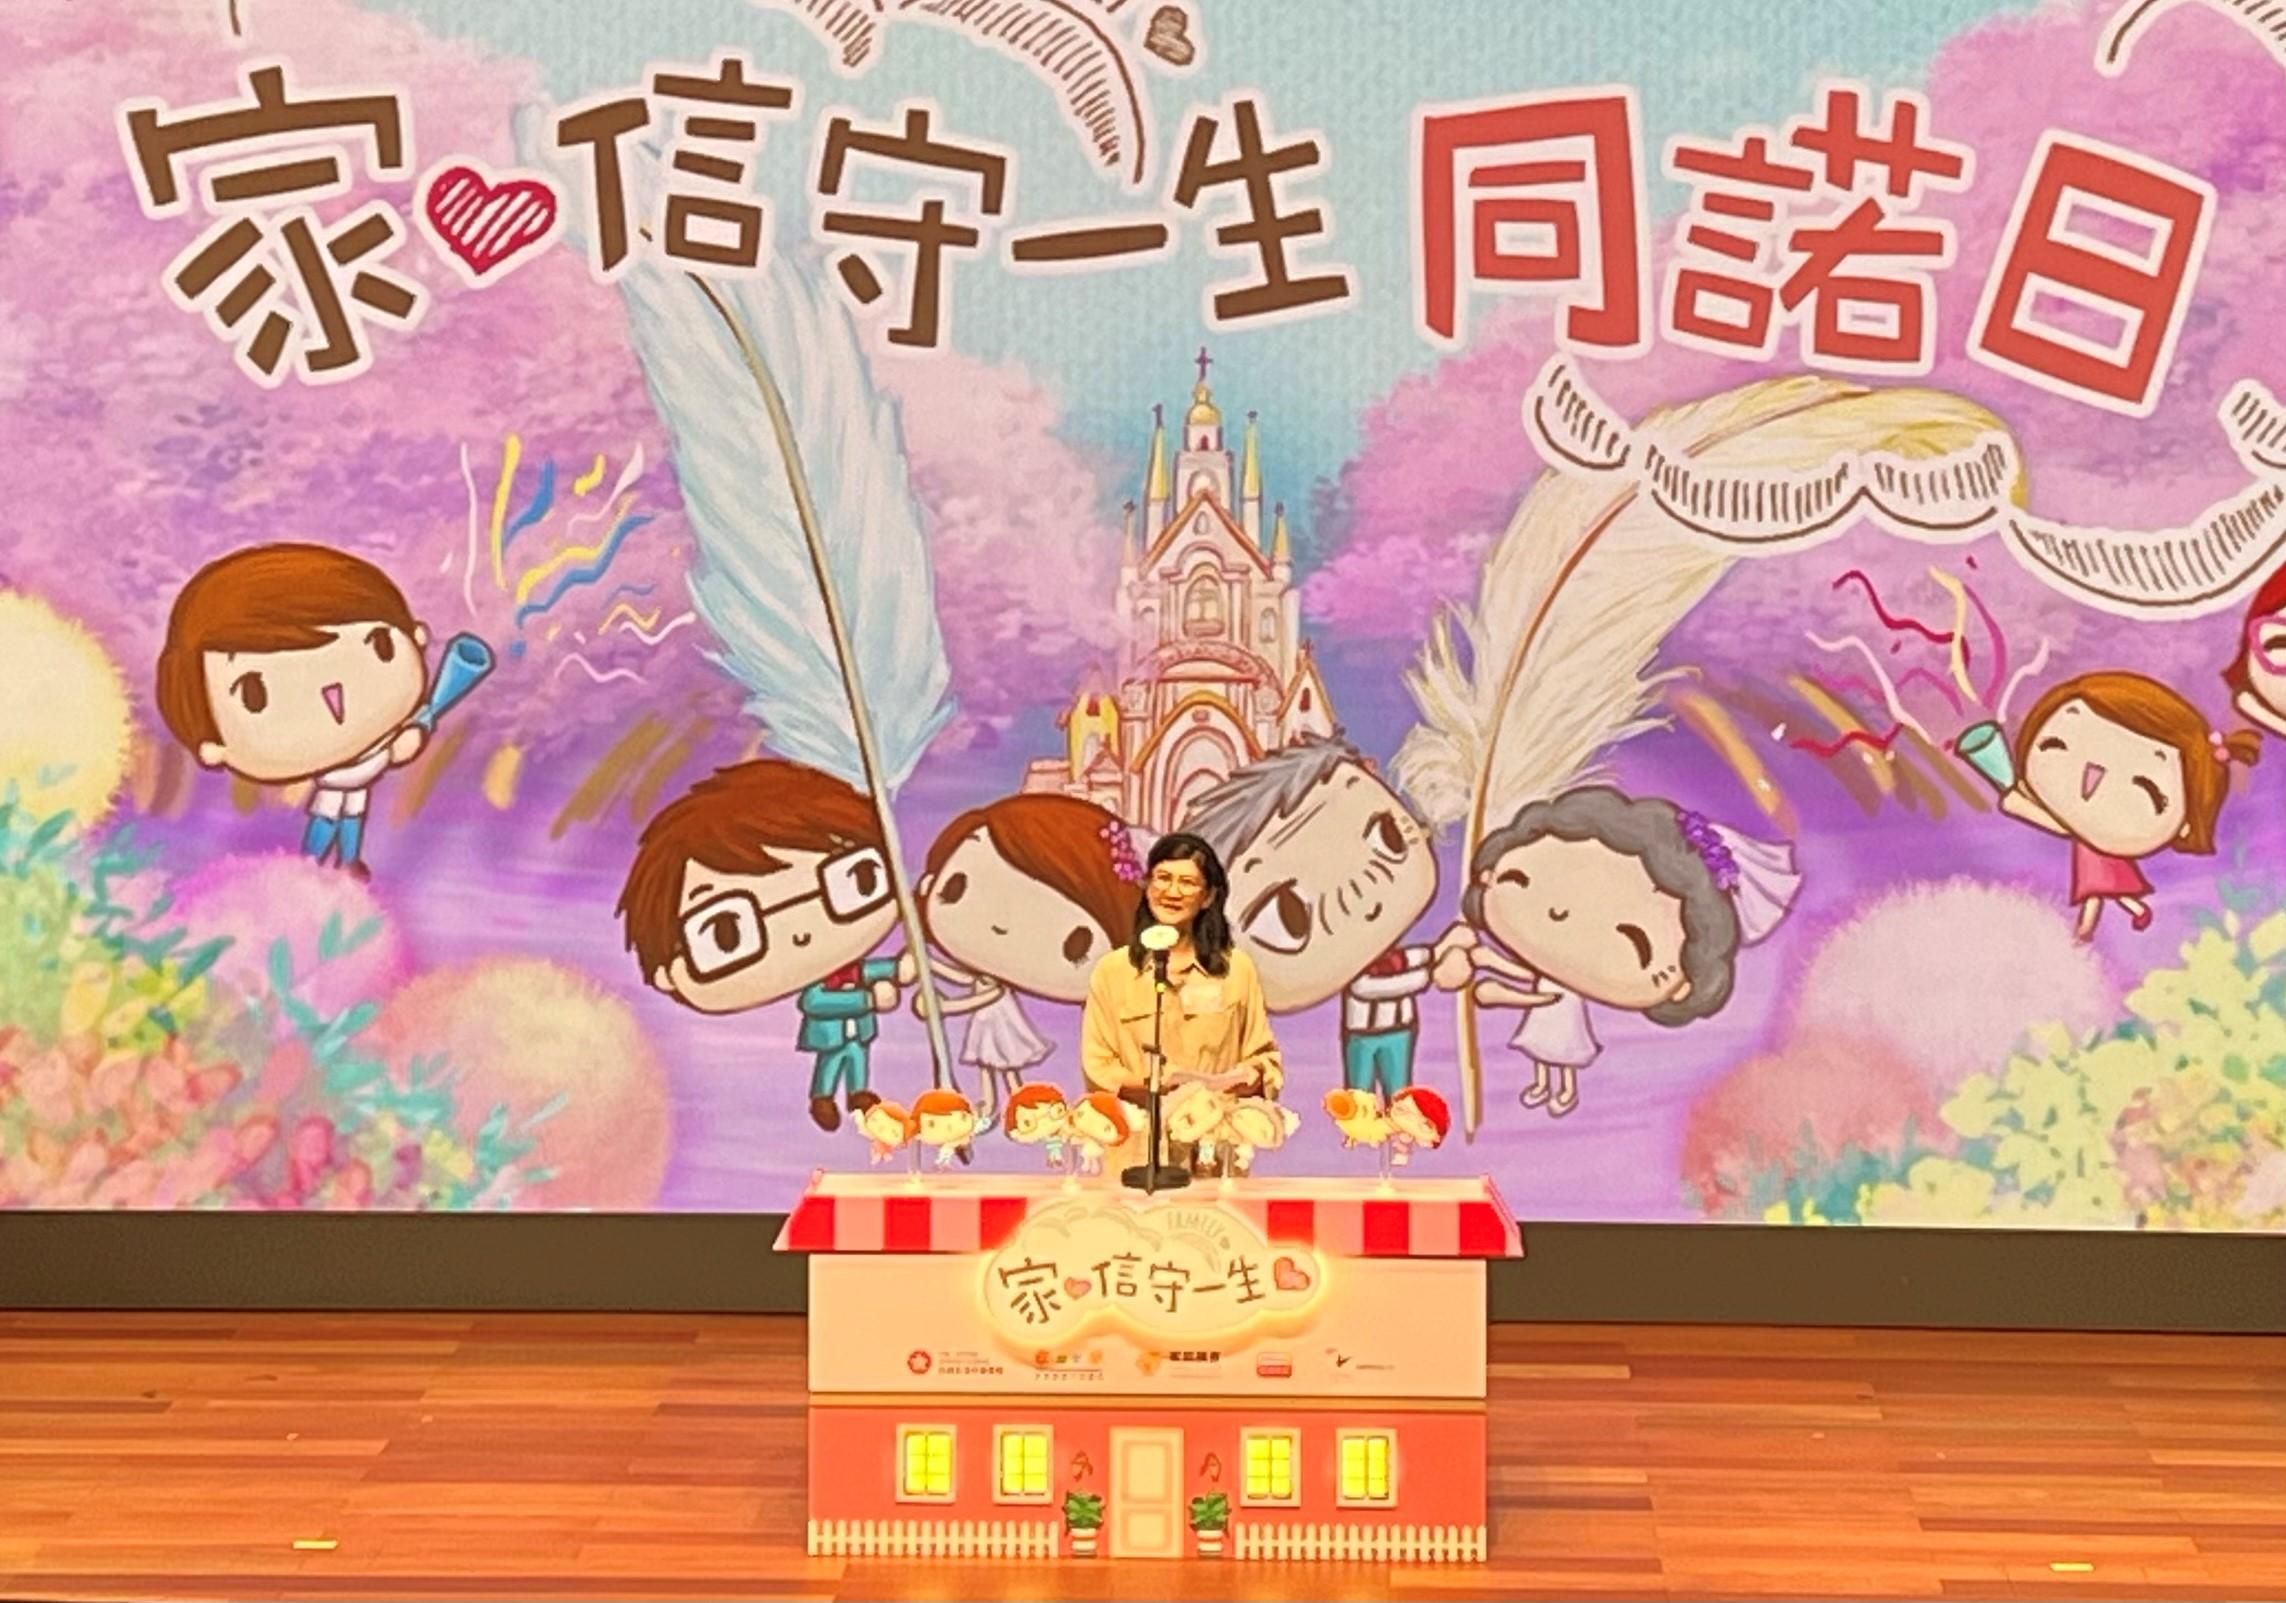 The Home and Youth Affairs Bureau, the Family Council, and Radio 2 of Radio Television Hong Kong jointly held a publicity event on "Marital Happiness and Harmony" today (September 24). Photo shows the Chairman of the Family Council, Ms Melissa Kaye Pang, delivering a speech at the event.